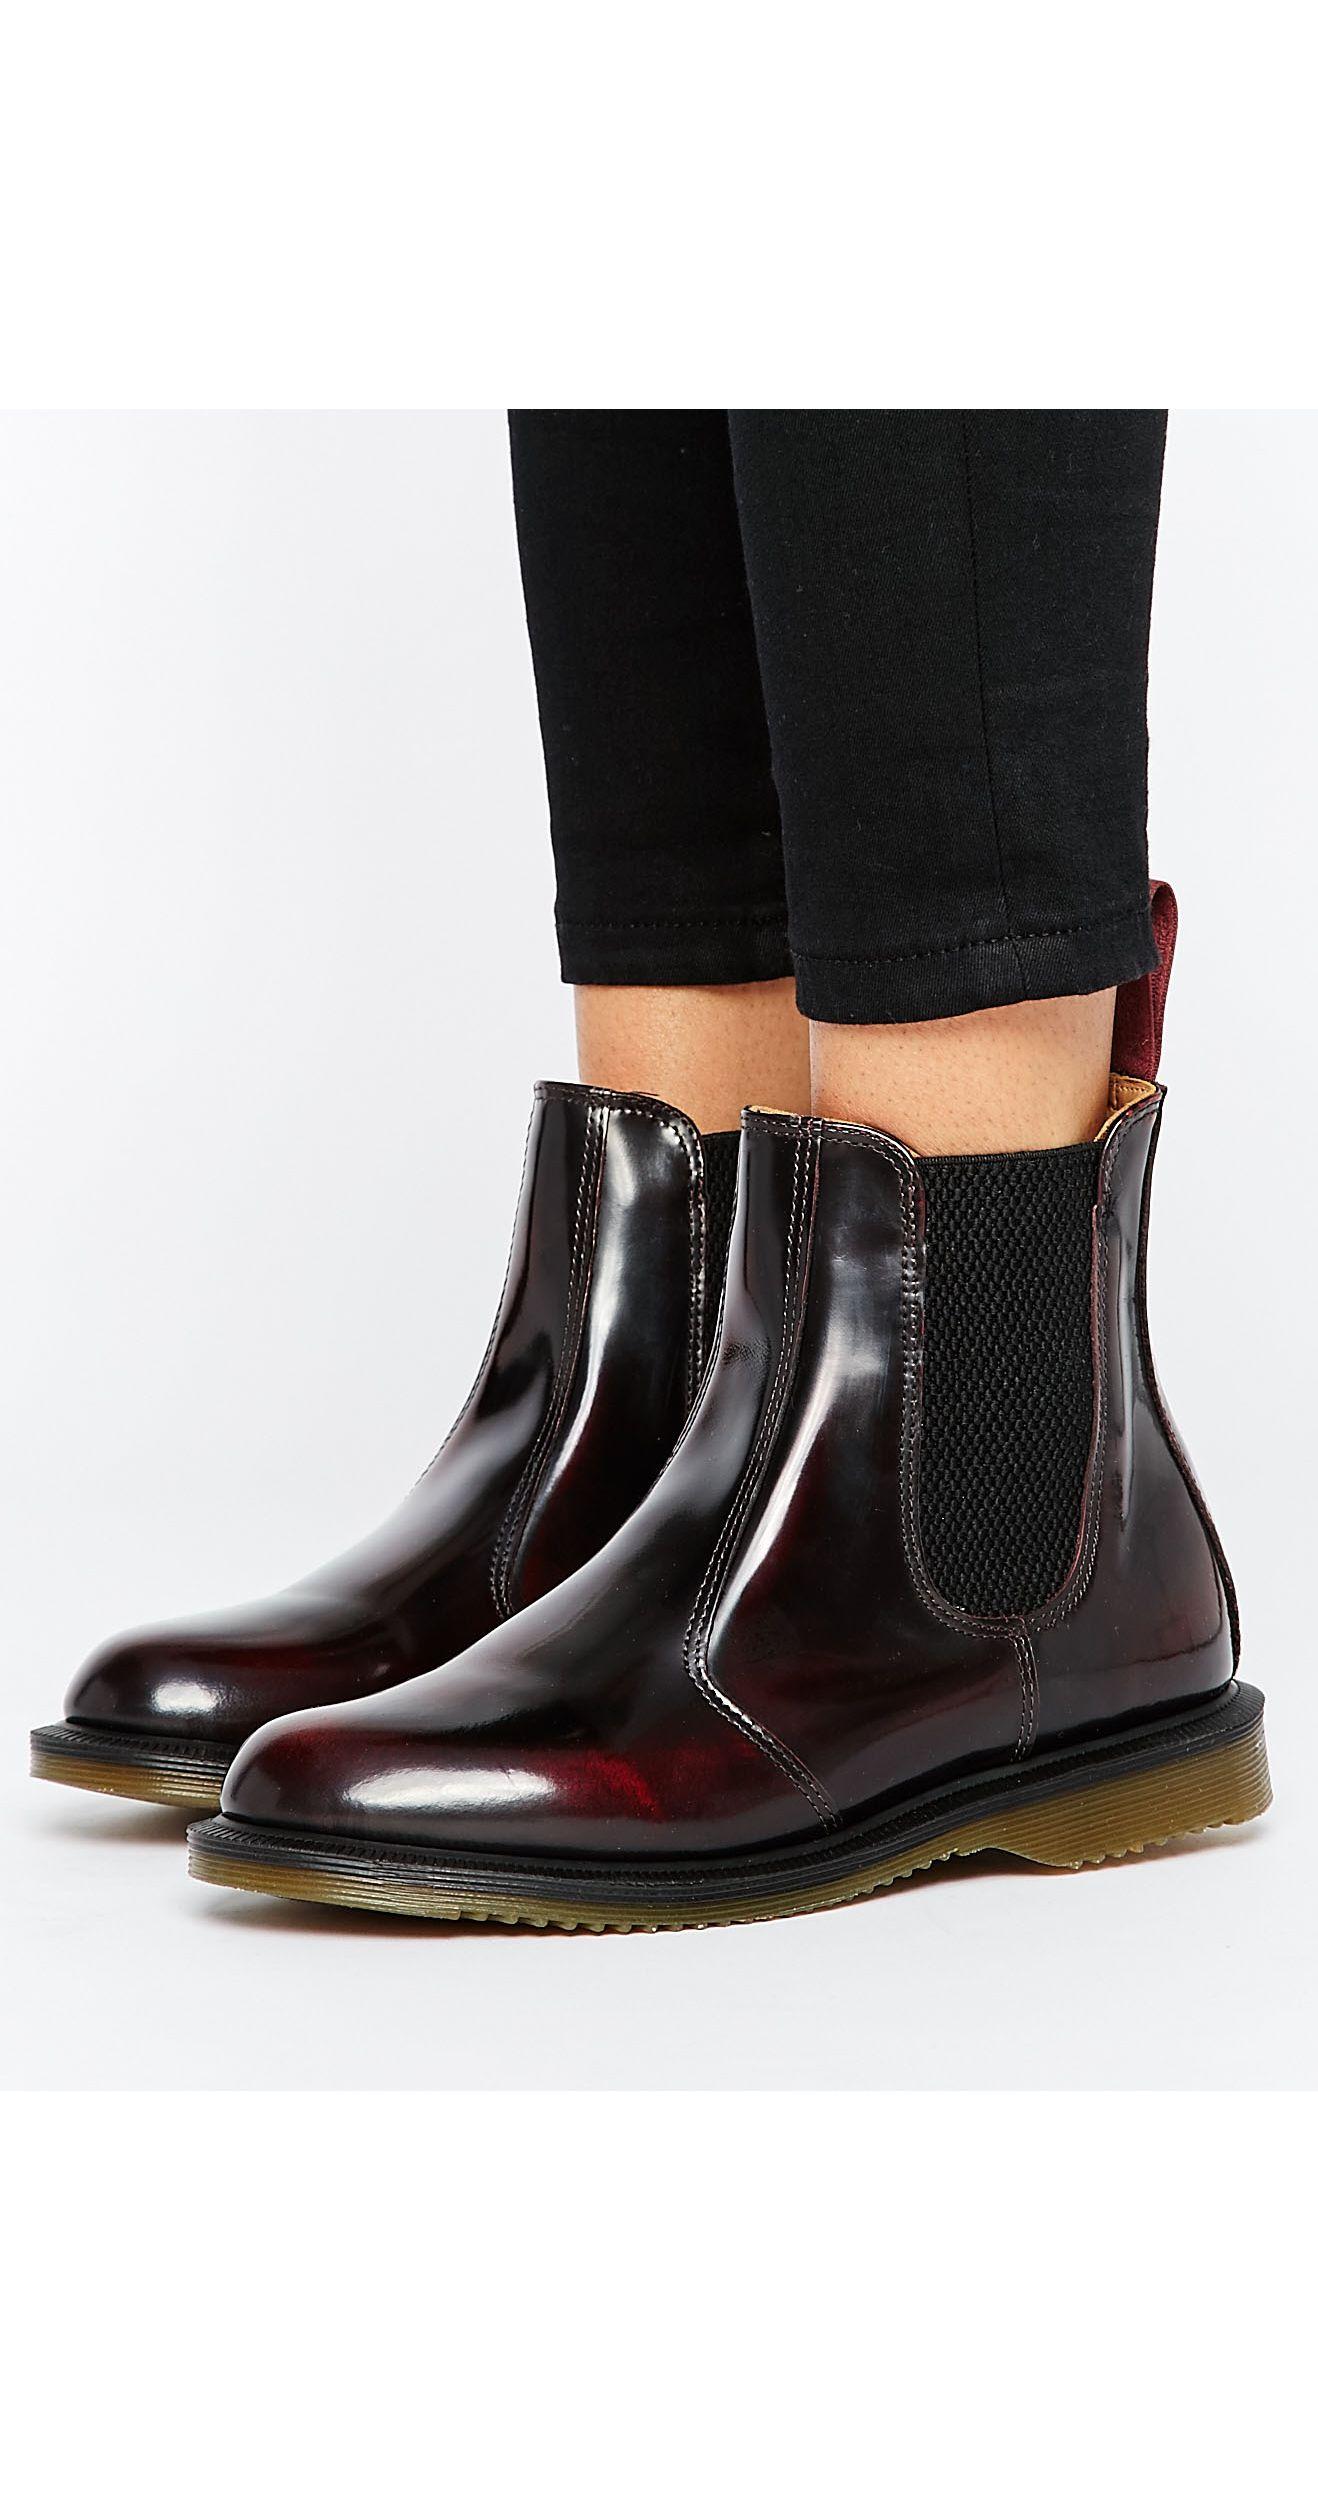 Dr. Martens Kensington Flora Burgundy Chelsea Boots in Red | Lyst Canada